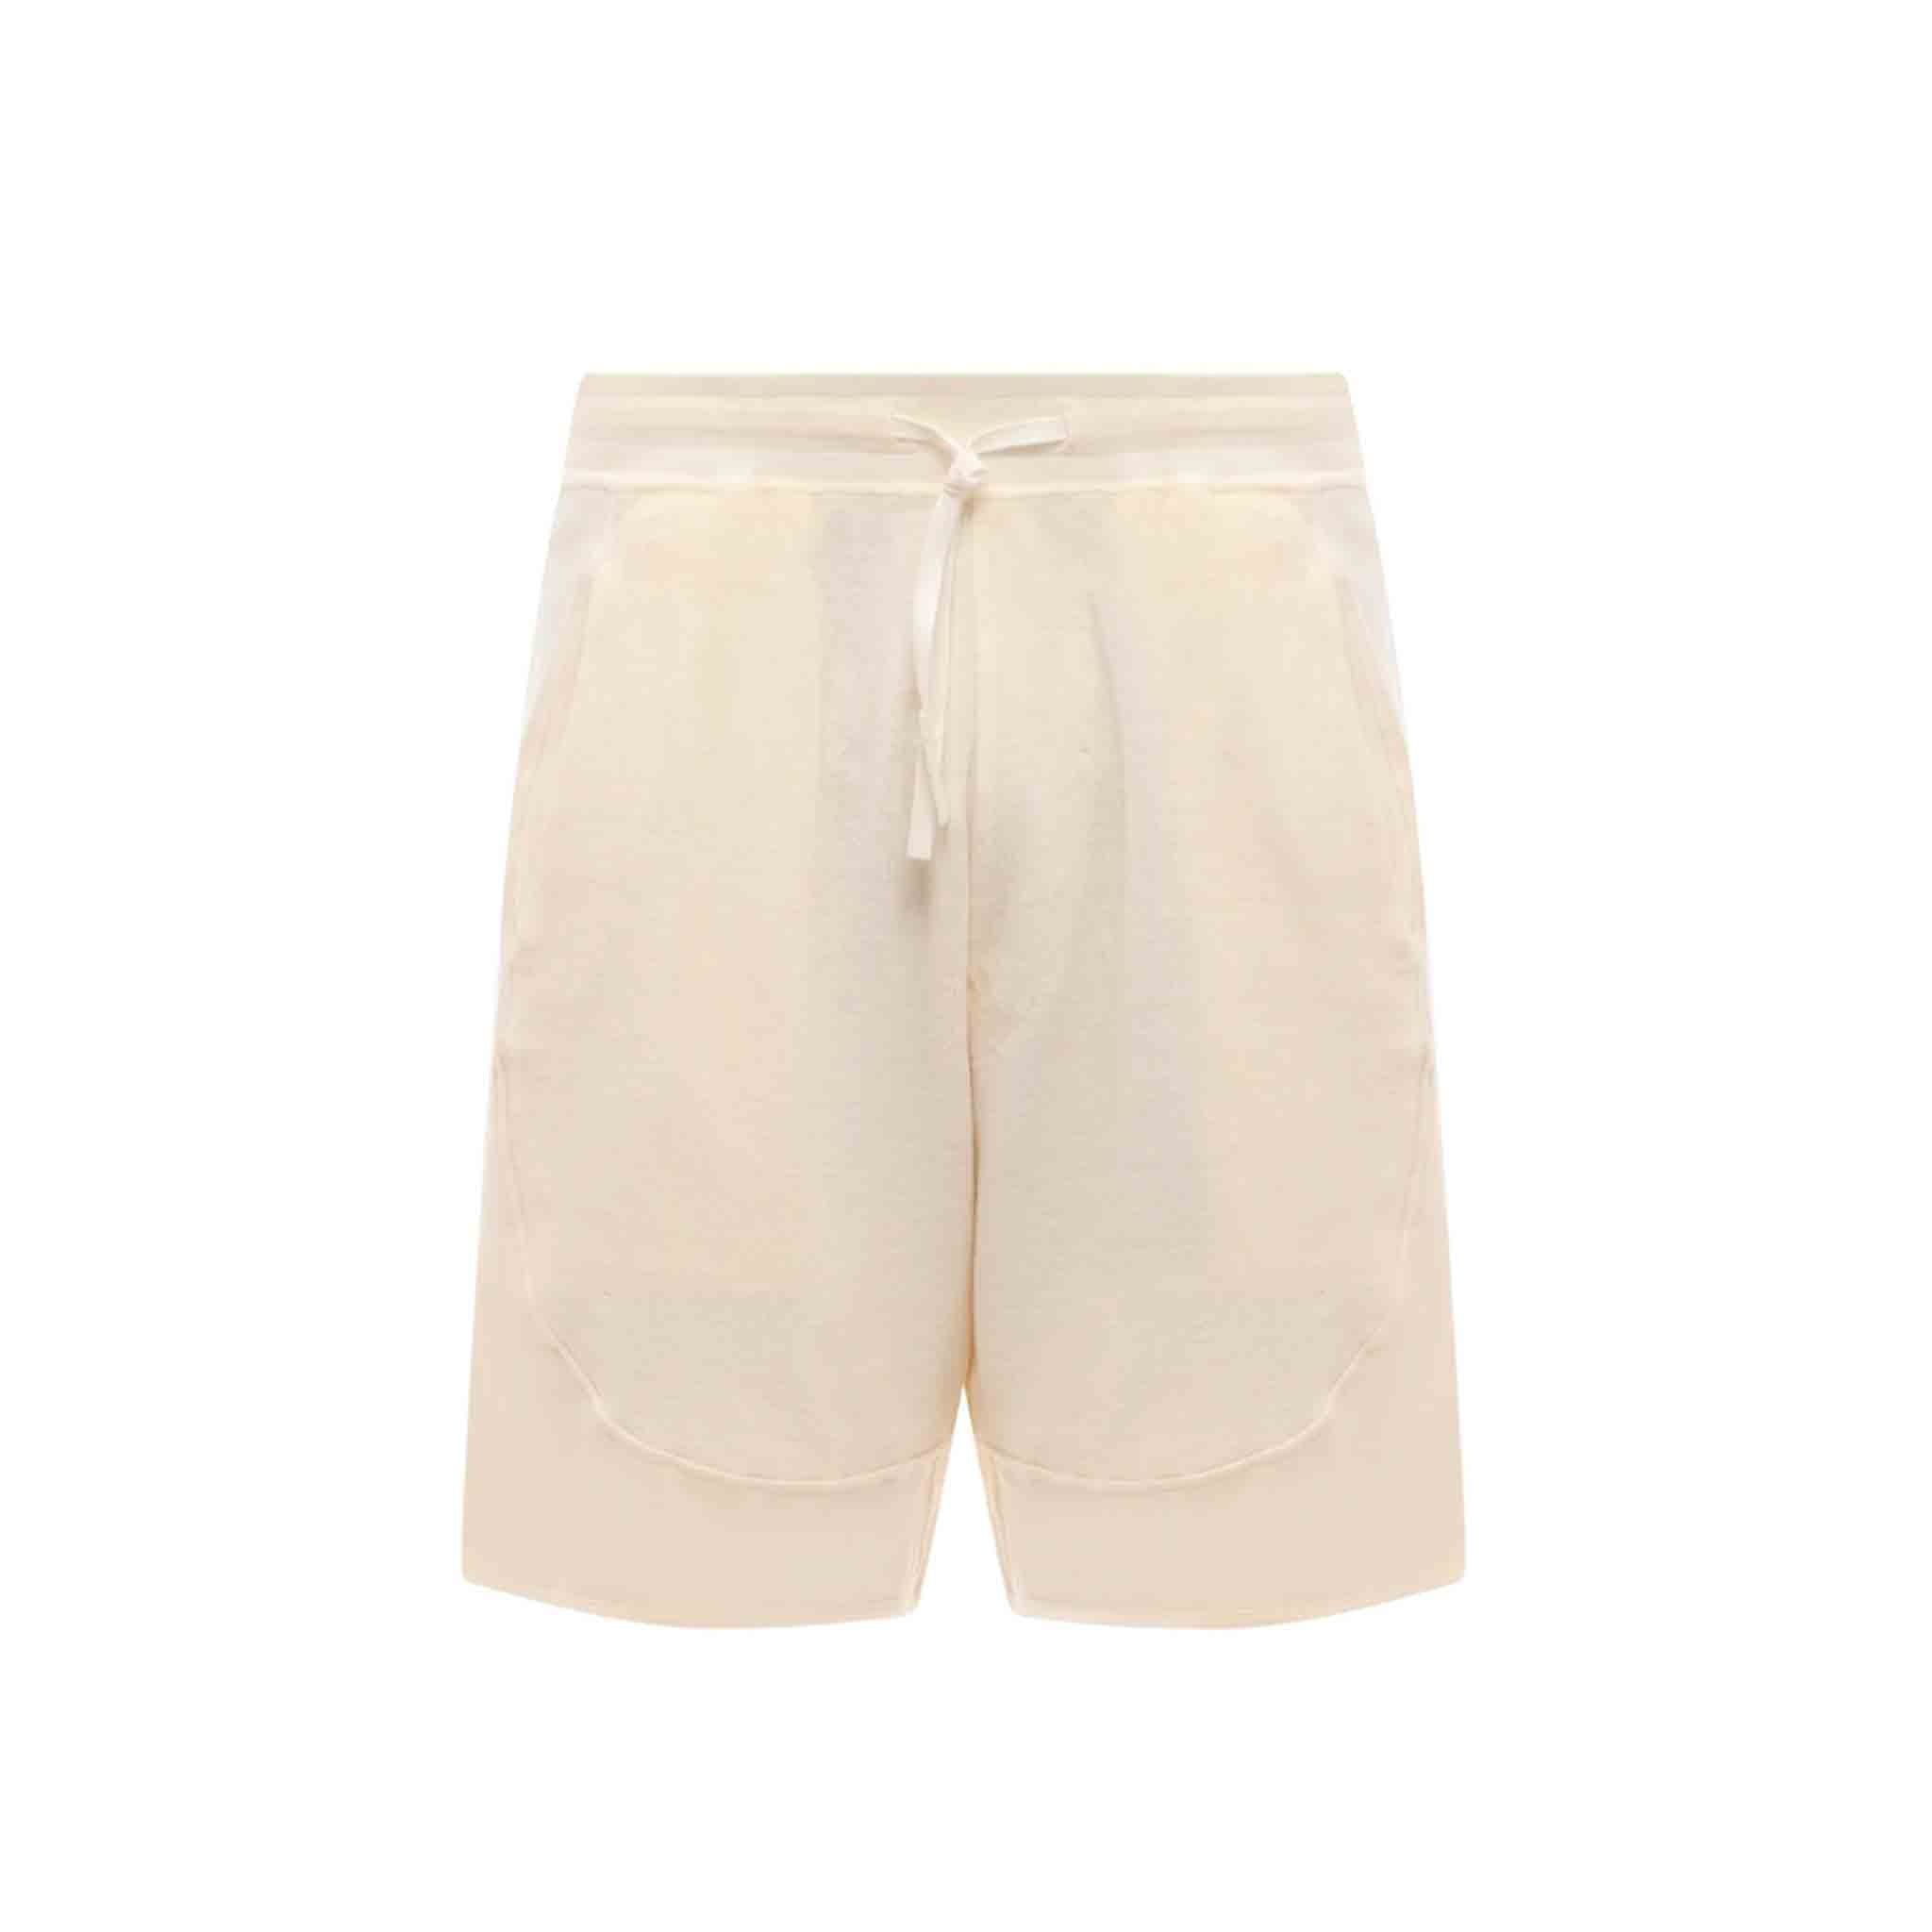 Stone Island Shadow Project Shorts Cotton Terry in Beige